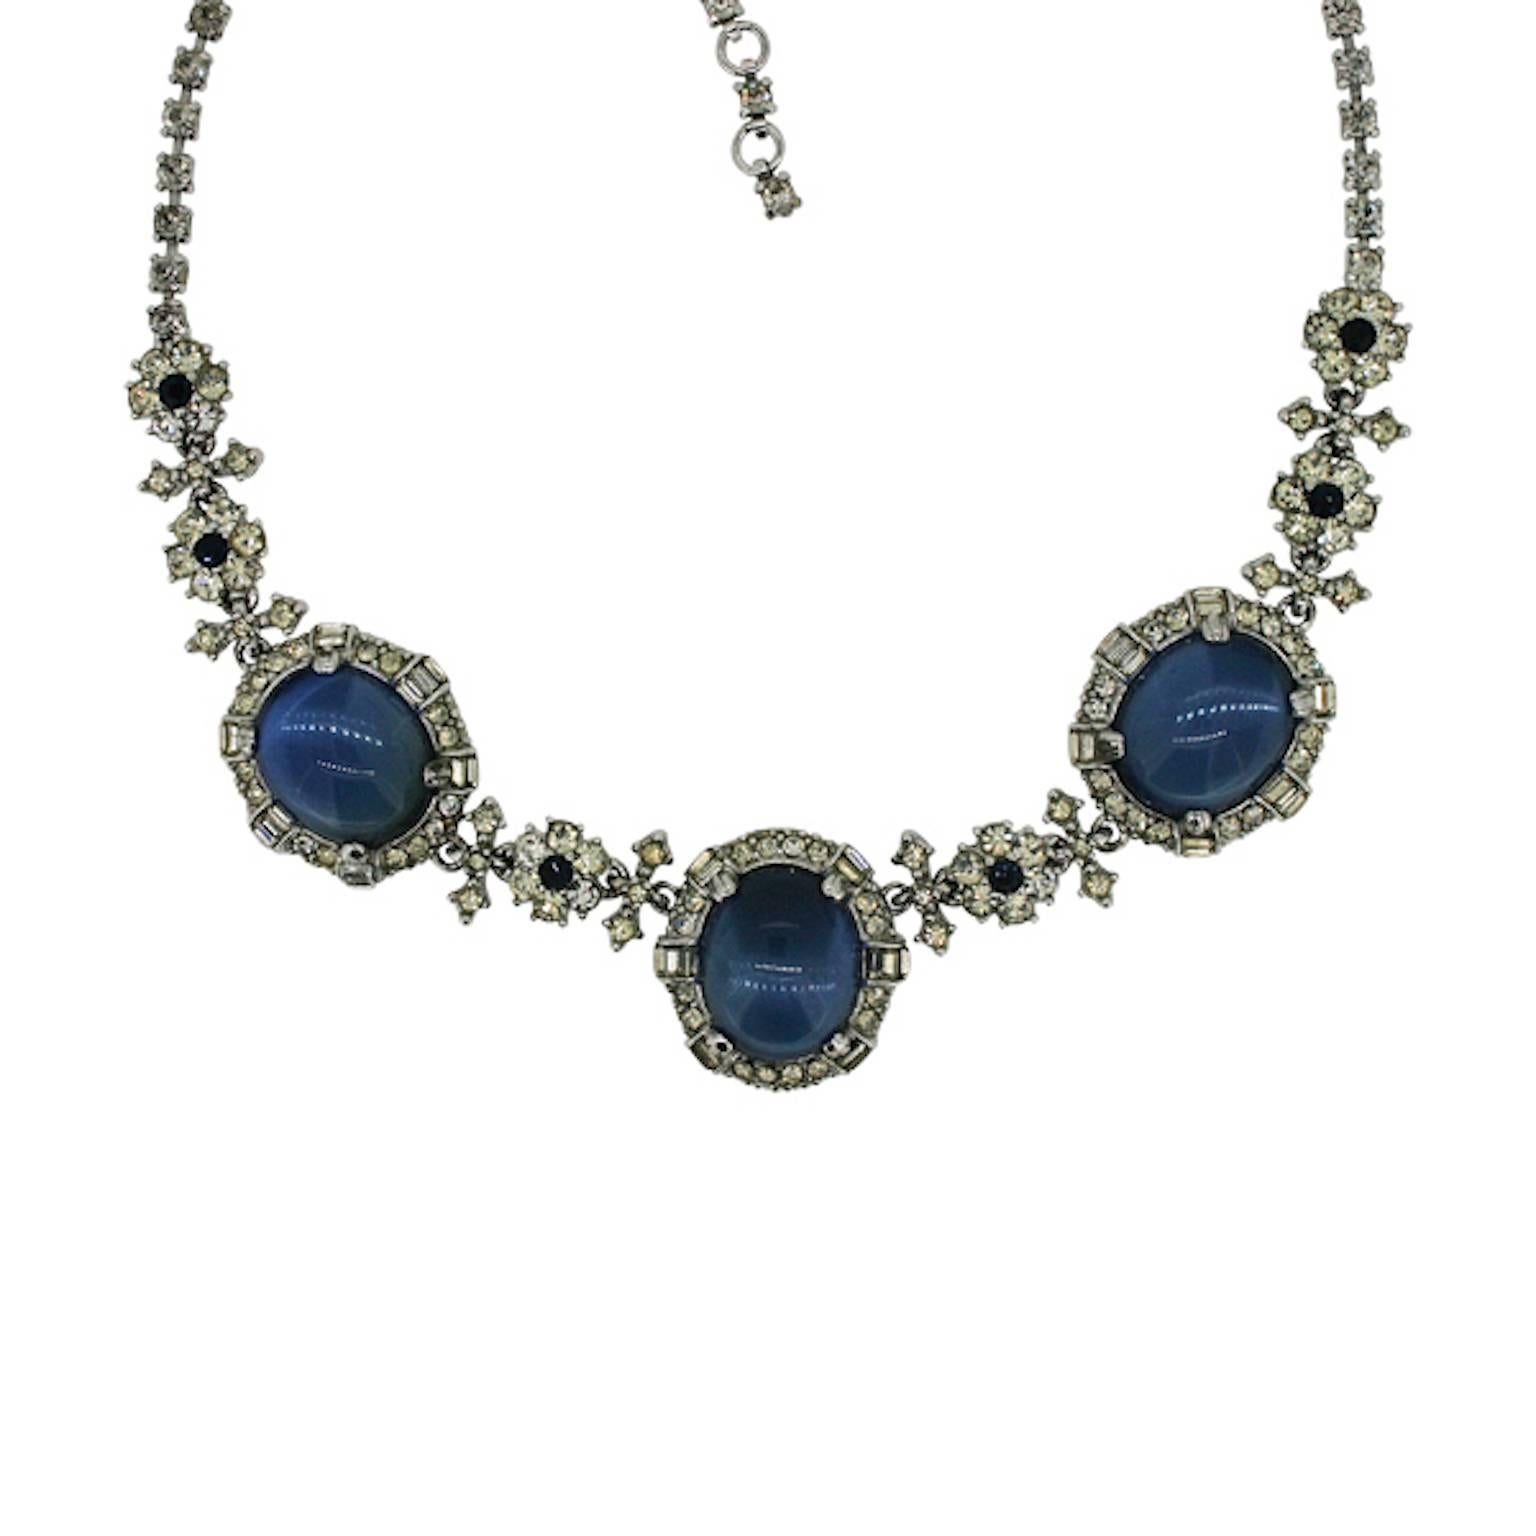 Ciner 1949 Rhinestone and Blue Glass Necklace and Earrings Set In Good Condition For Sale In Wigan, GB